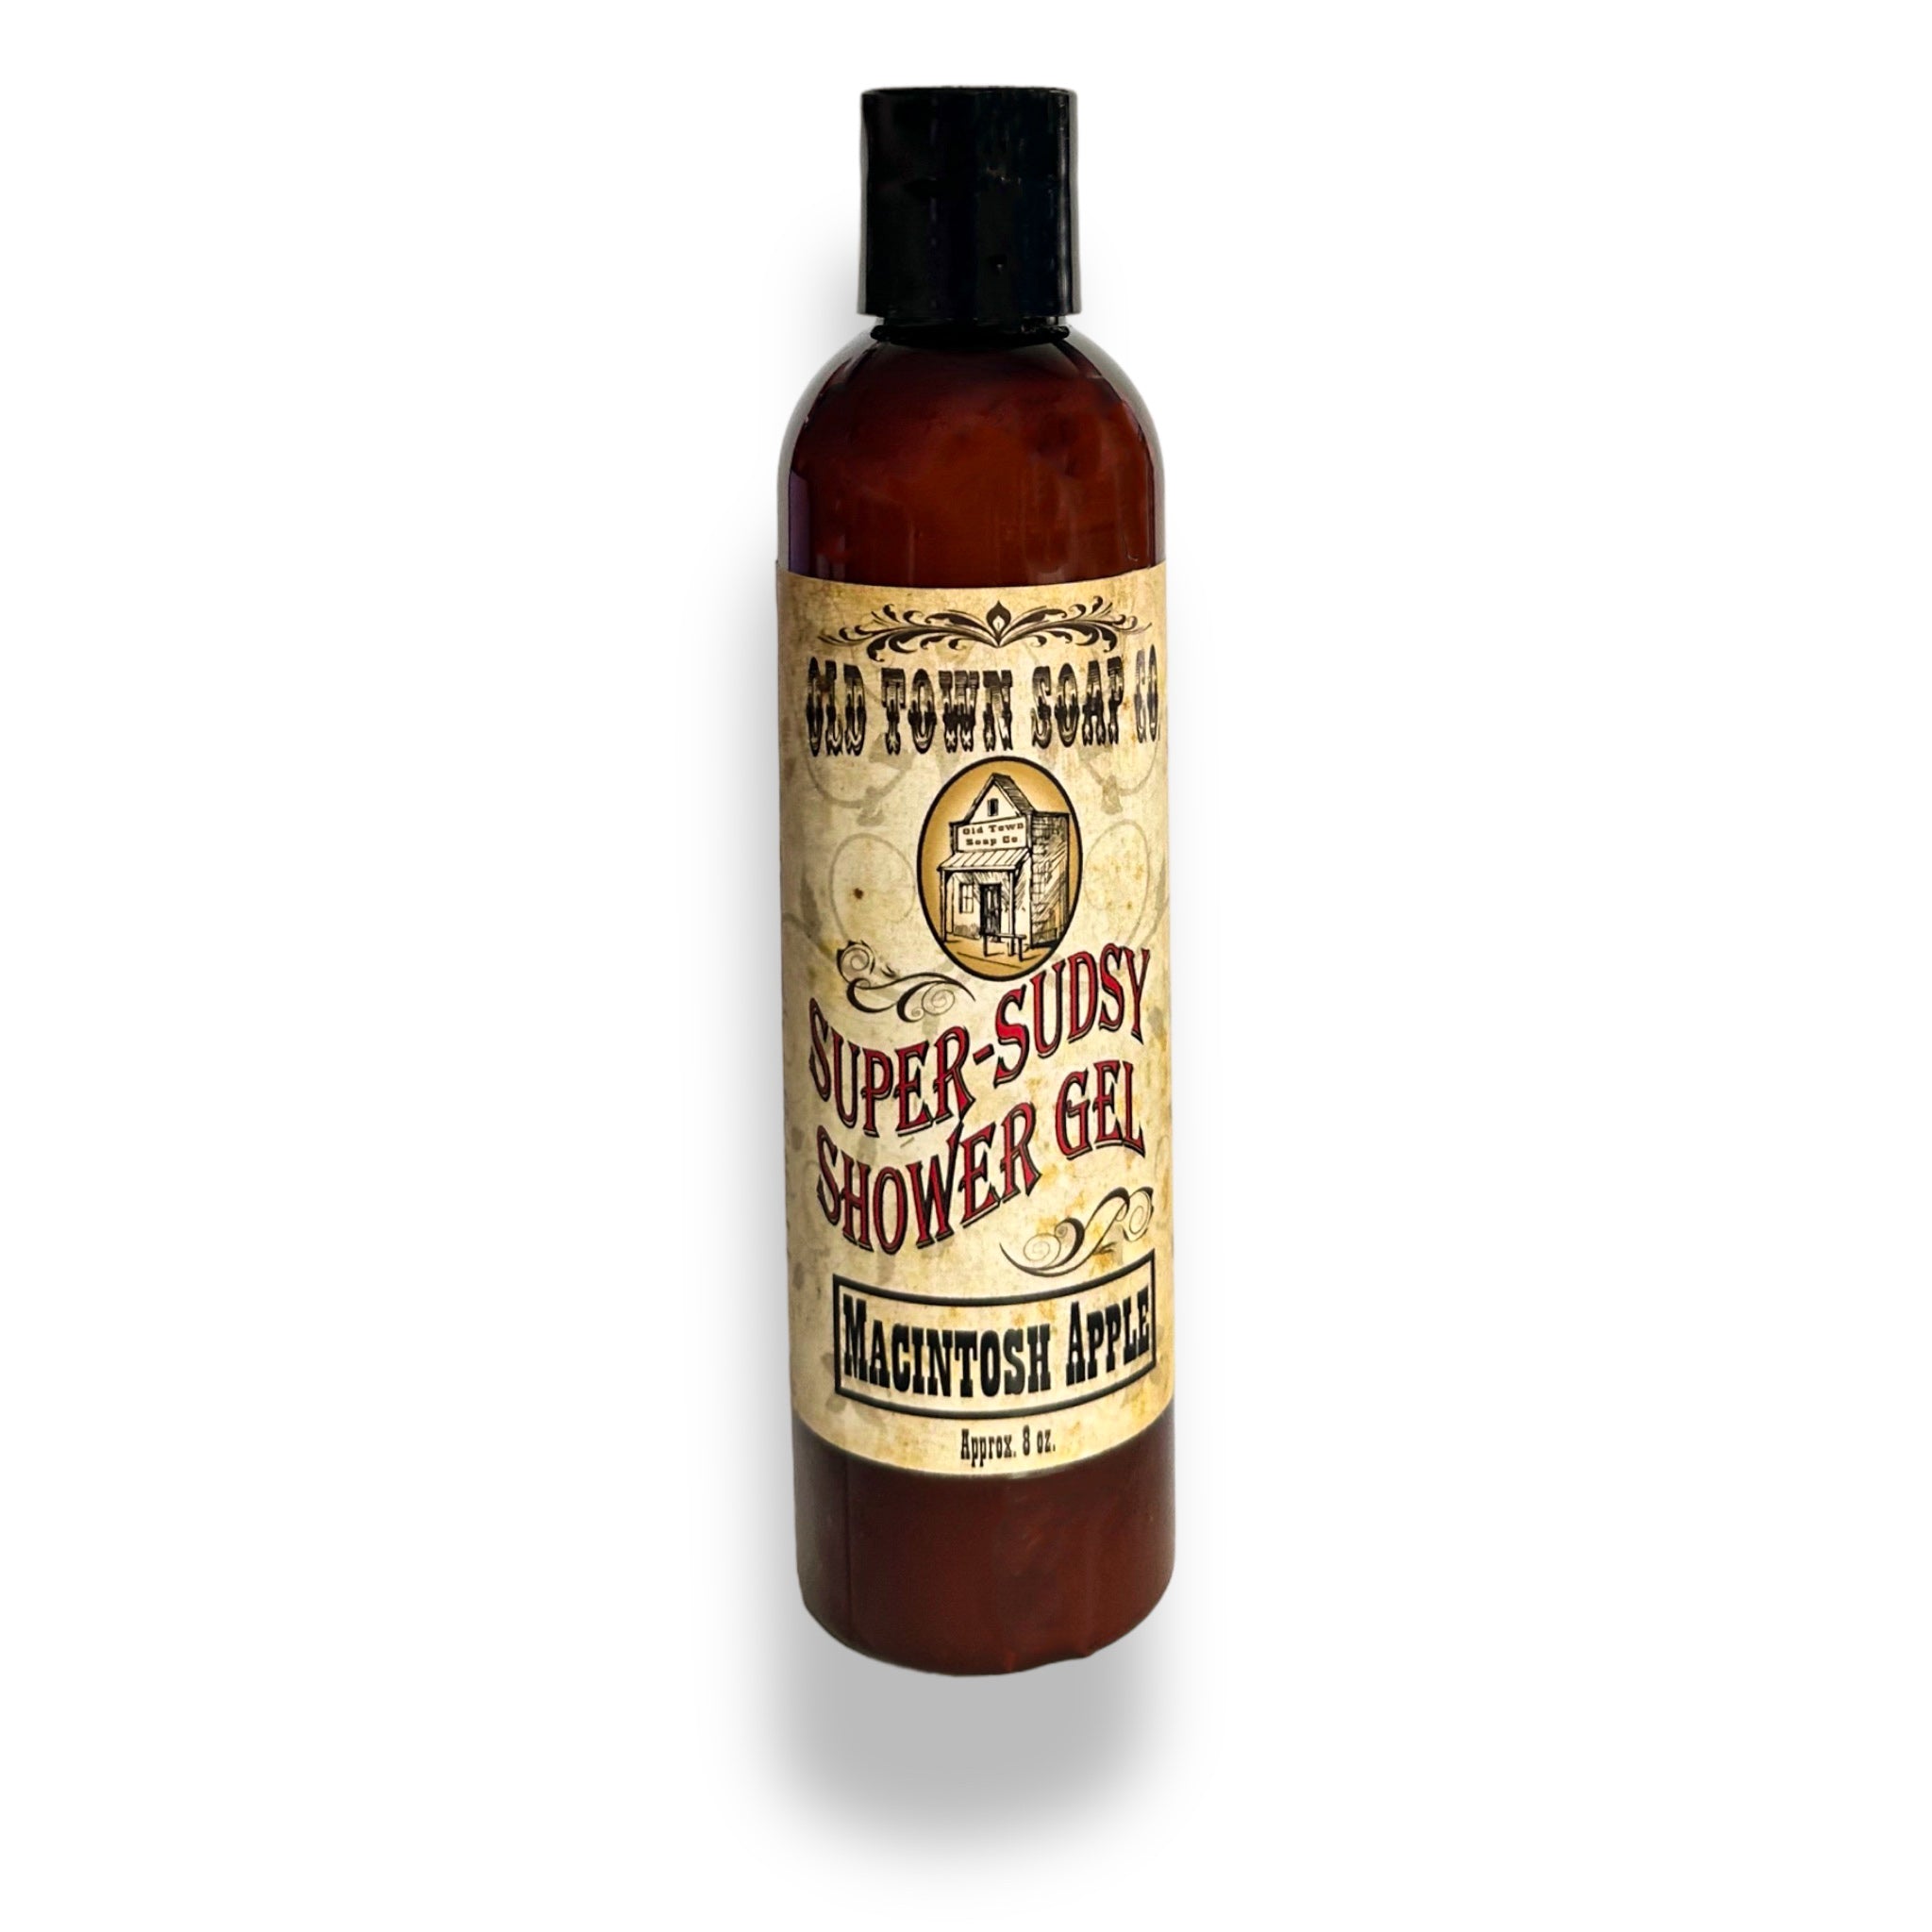 Old Town Soap Co - Super-Sudsy SHOWER GEL